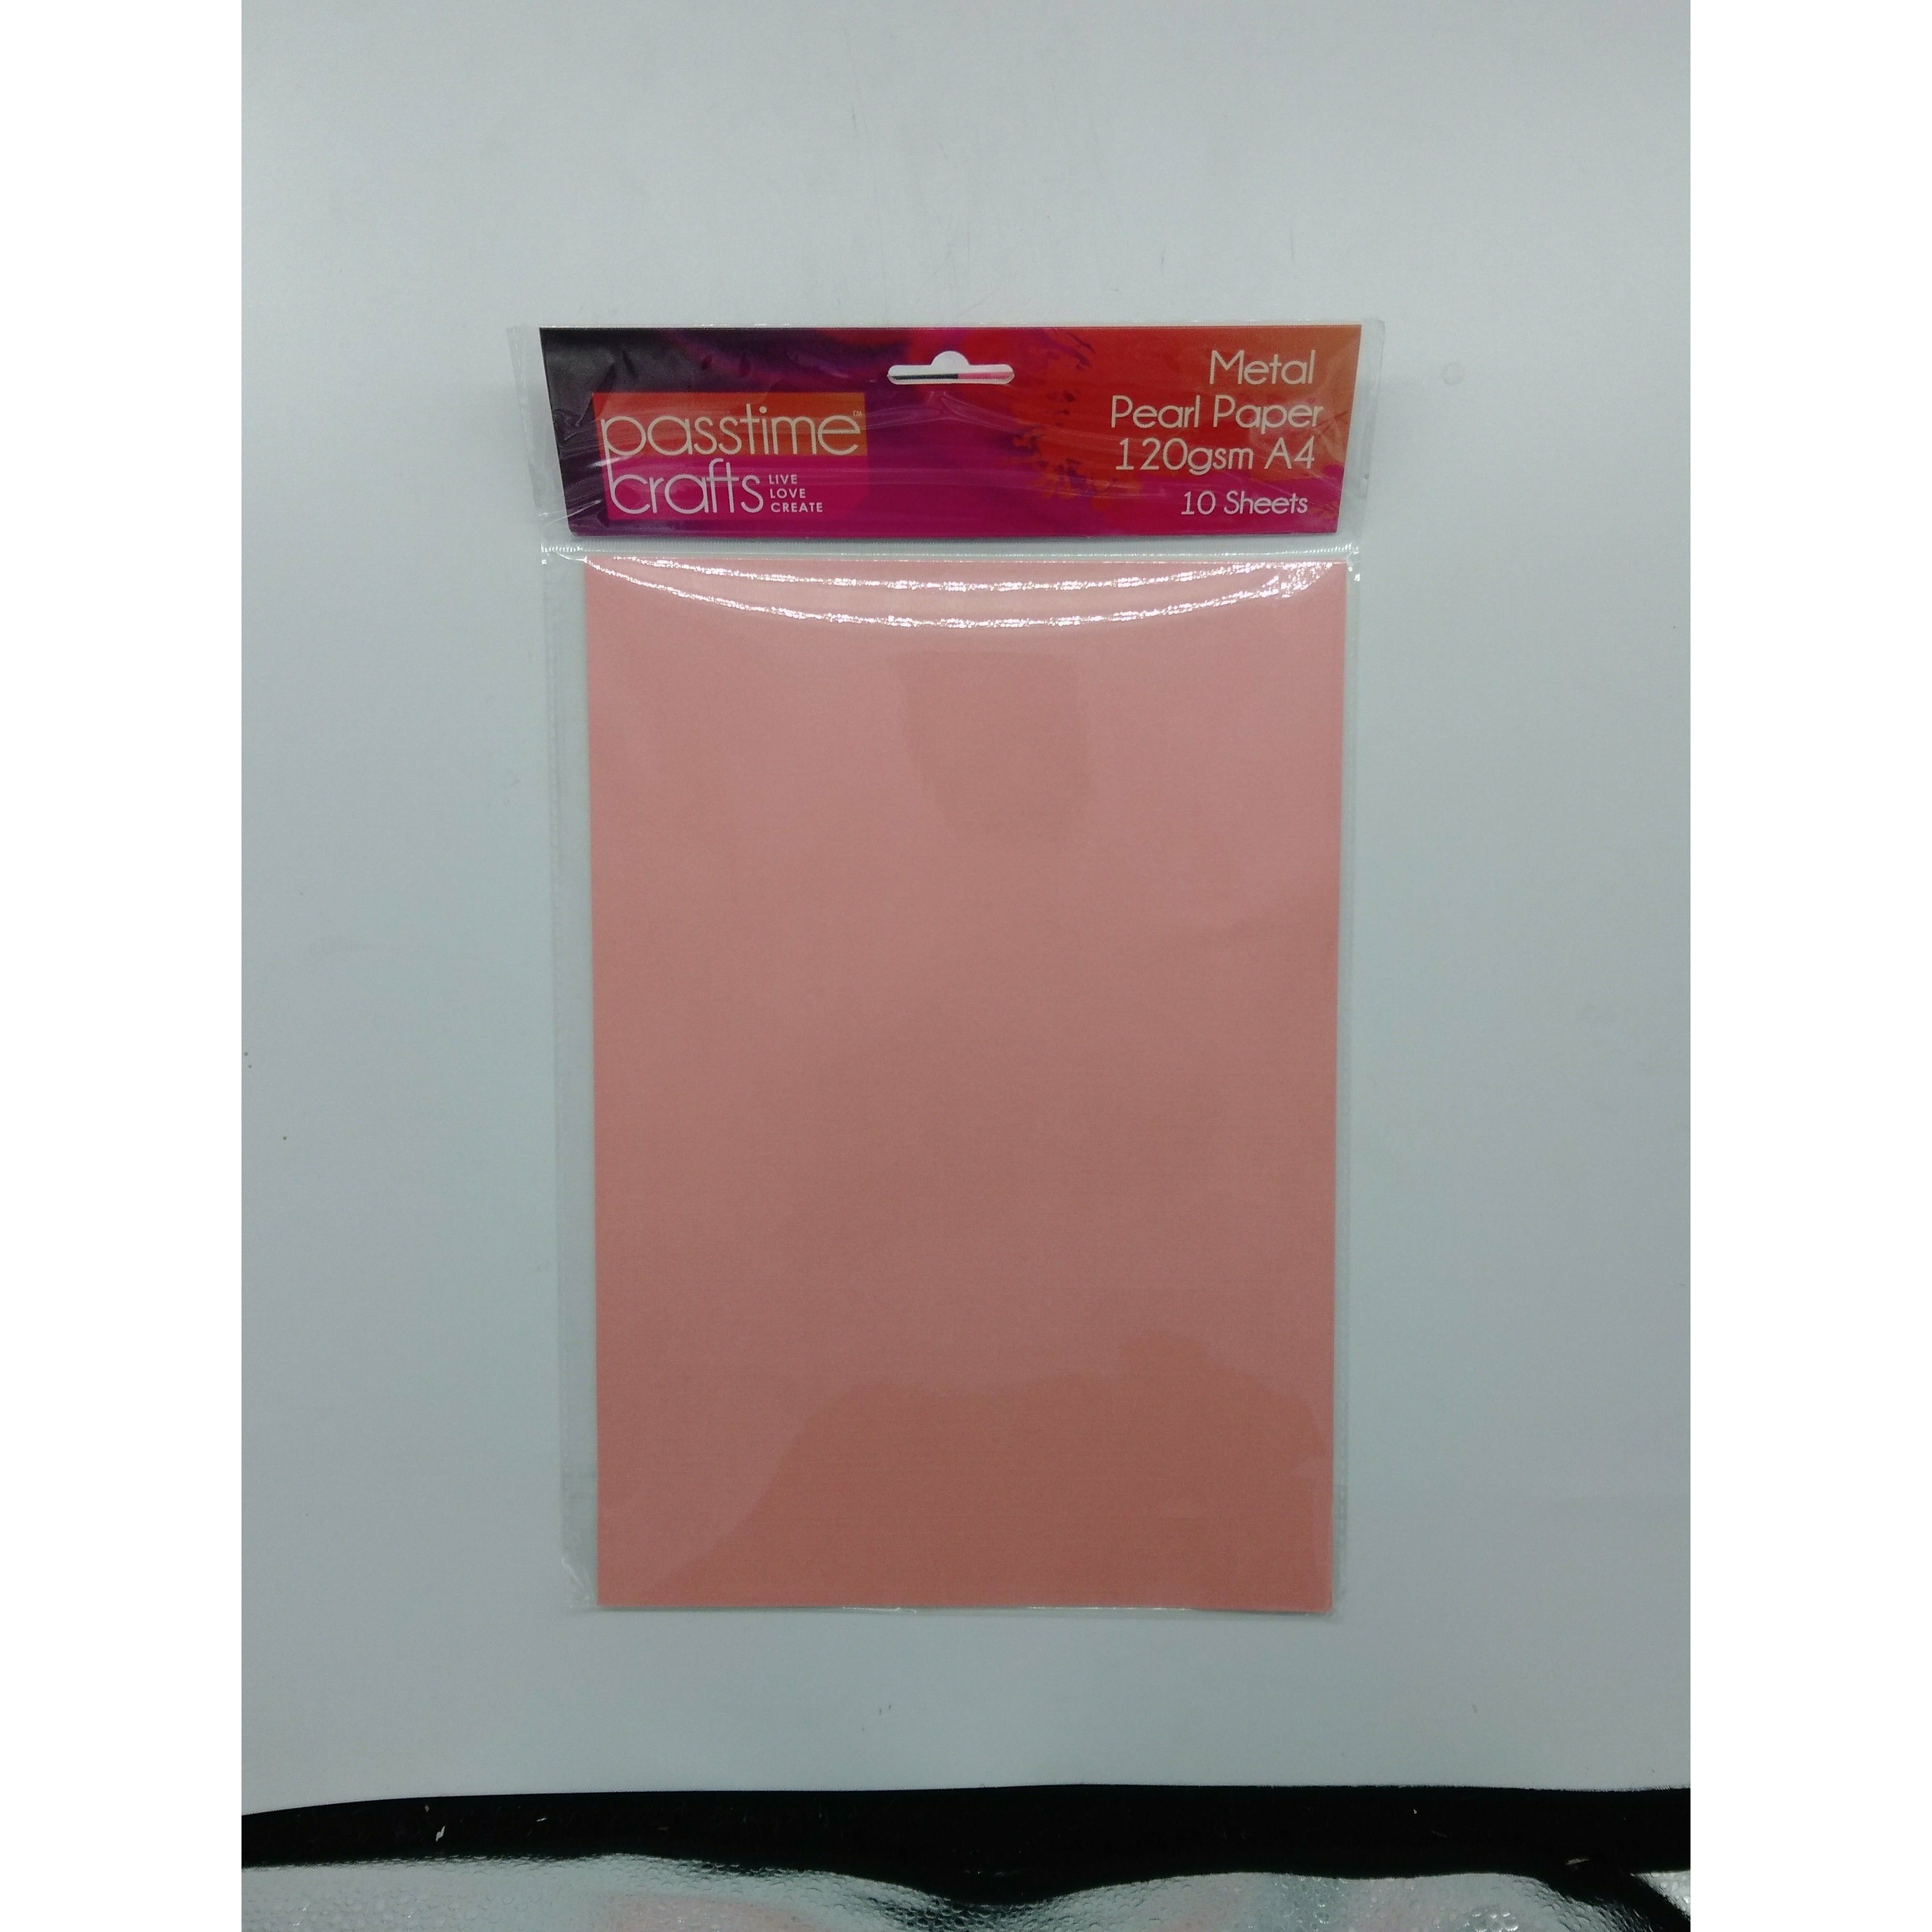 Metal Pearl Paper 120gsm A4 10 Sheets Assorted - See Colours Below - Dollars and Sense